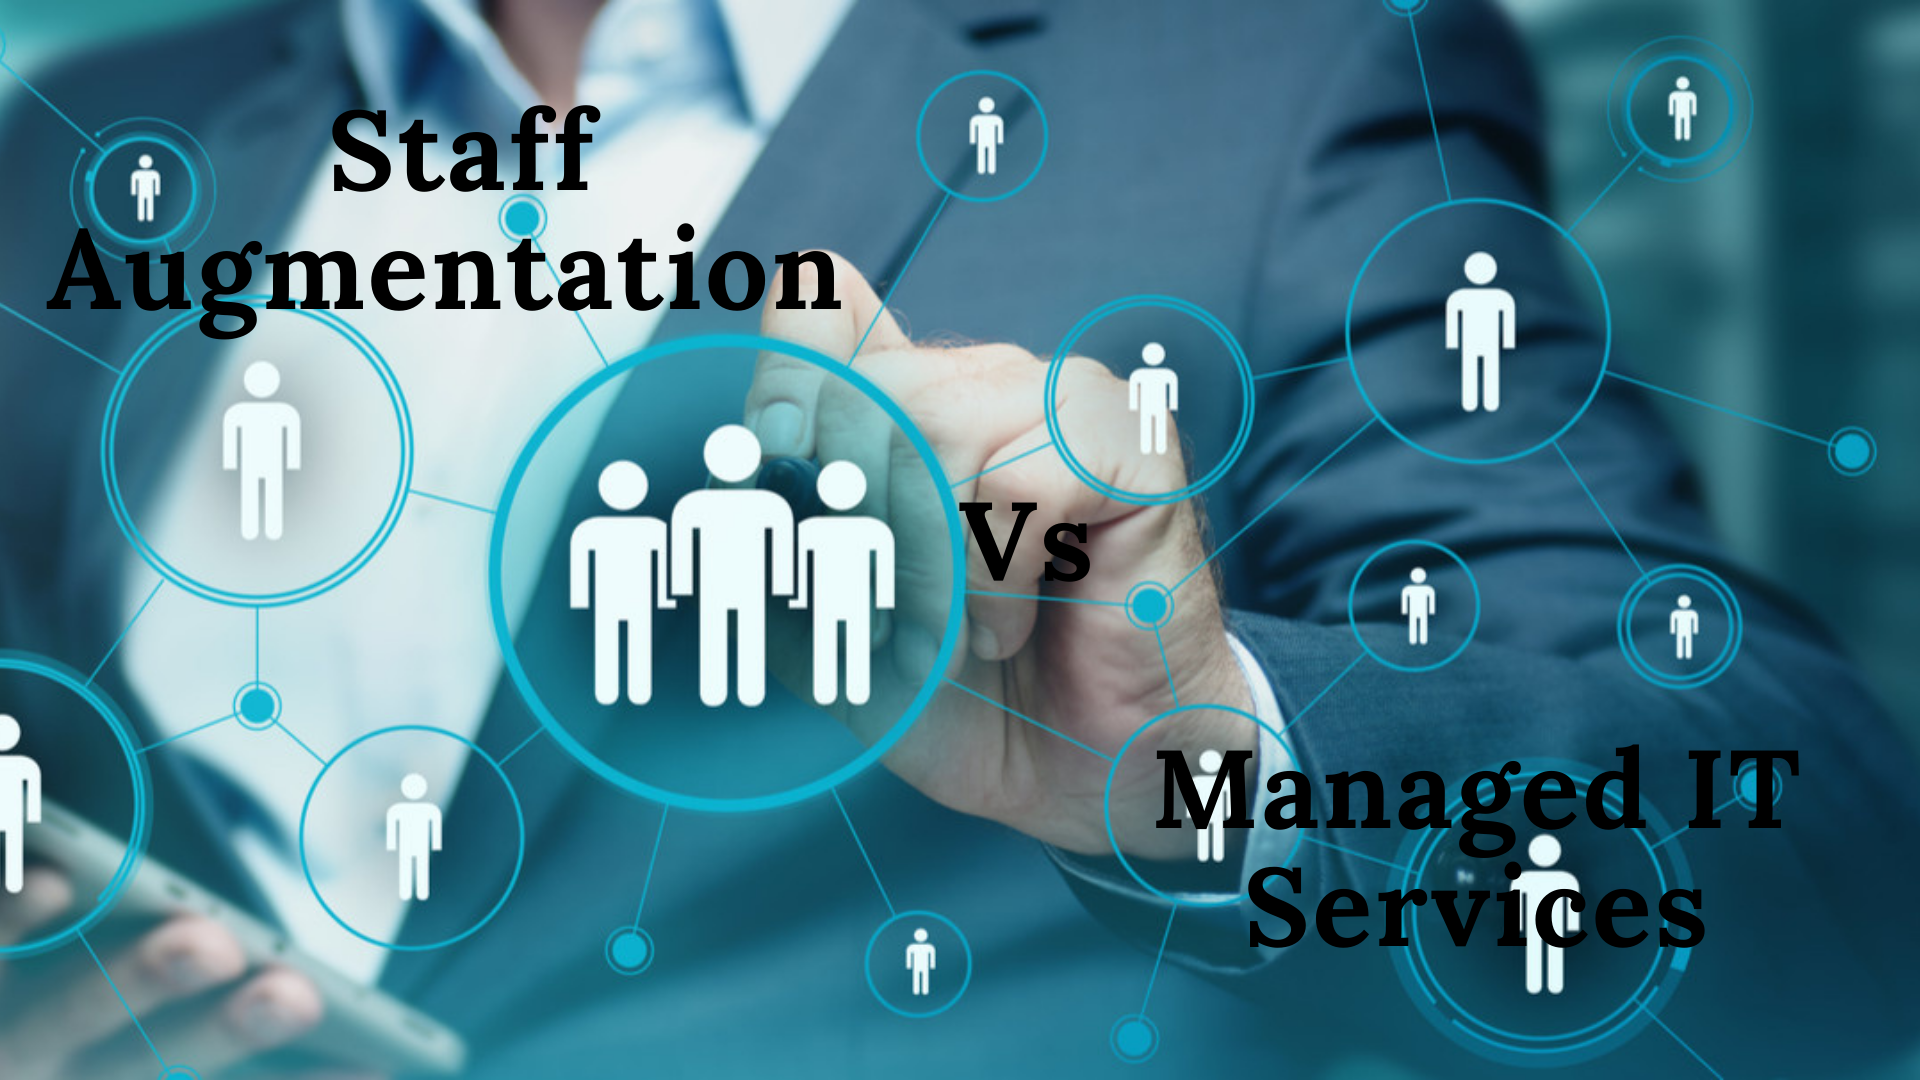 Staff Augmentation Vs Managed IT Services - Supersourcing